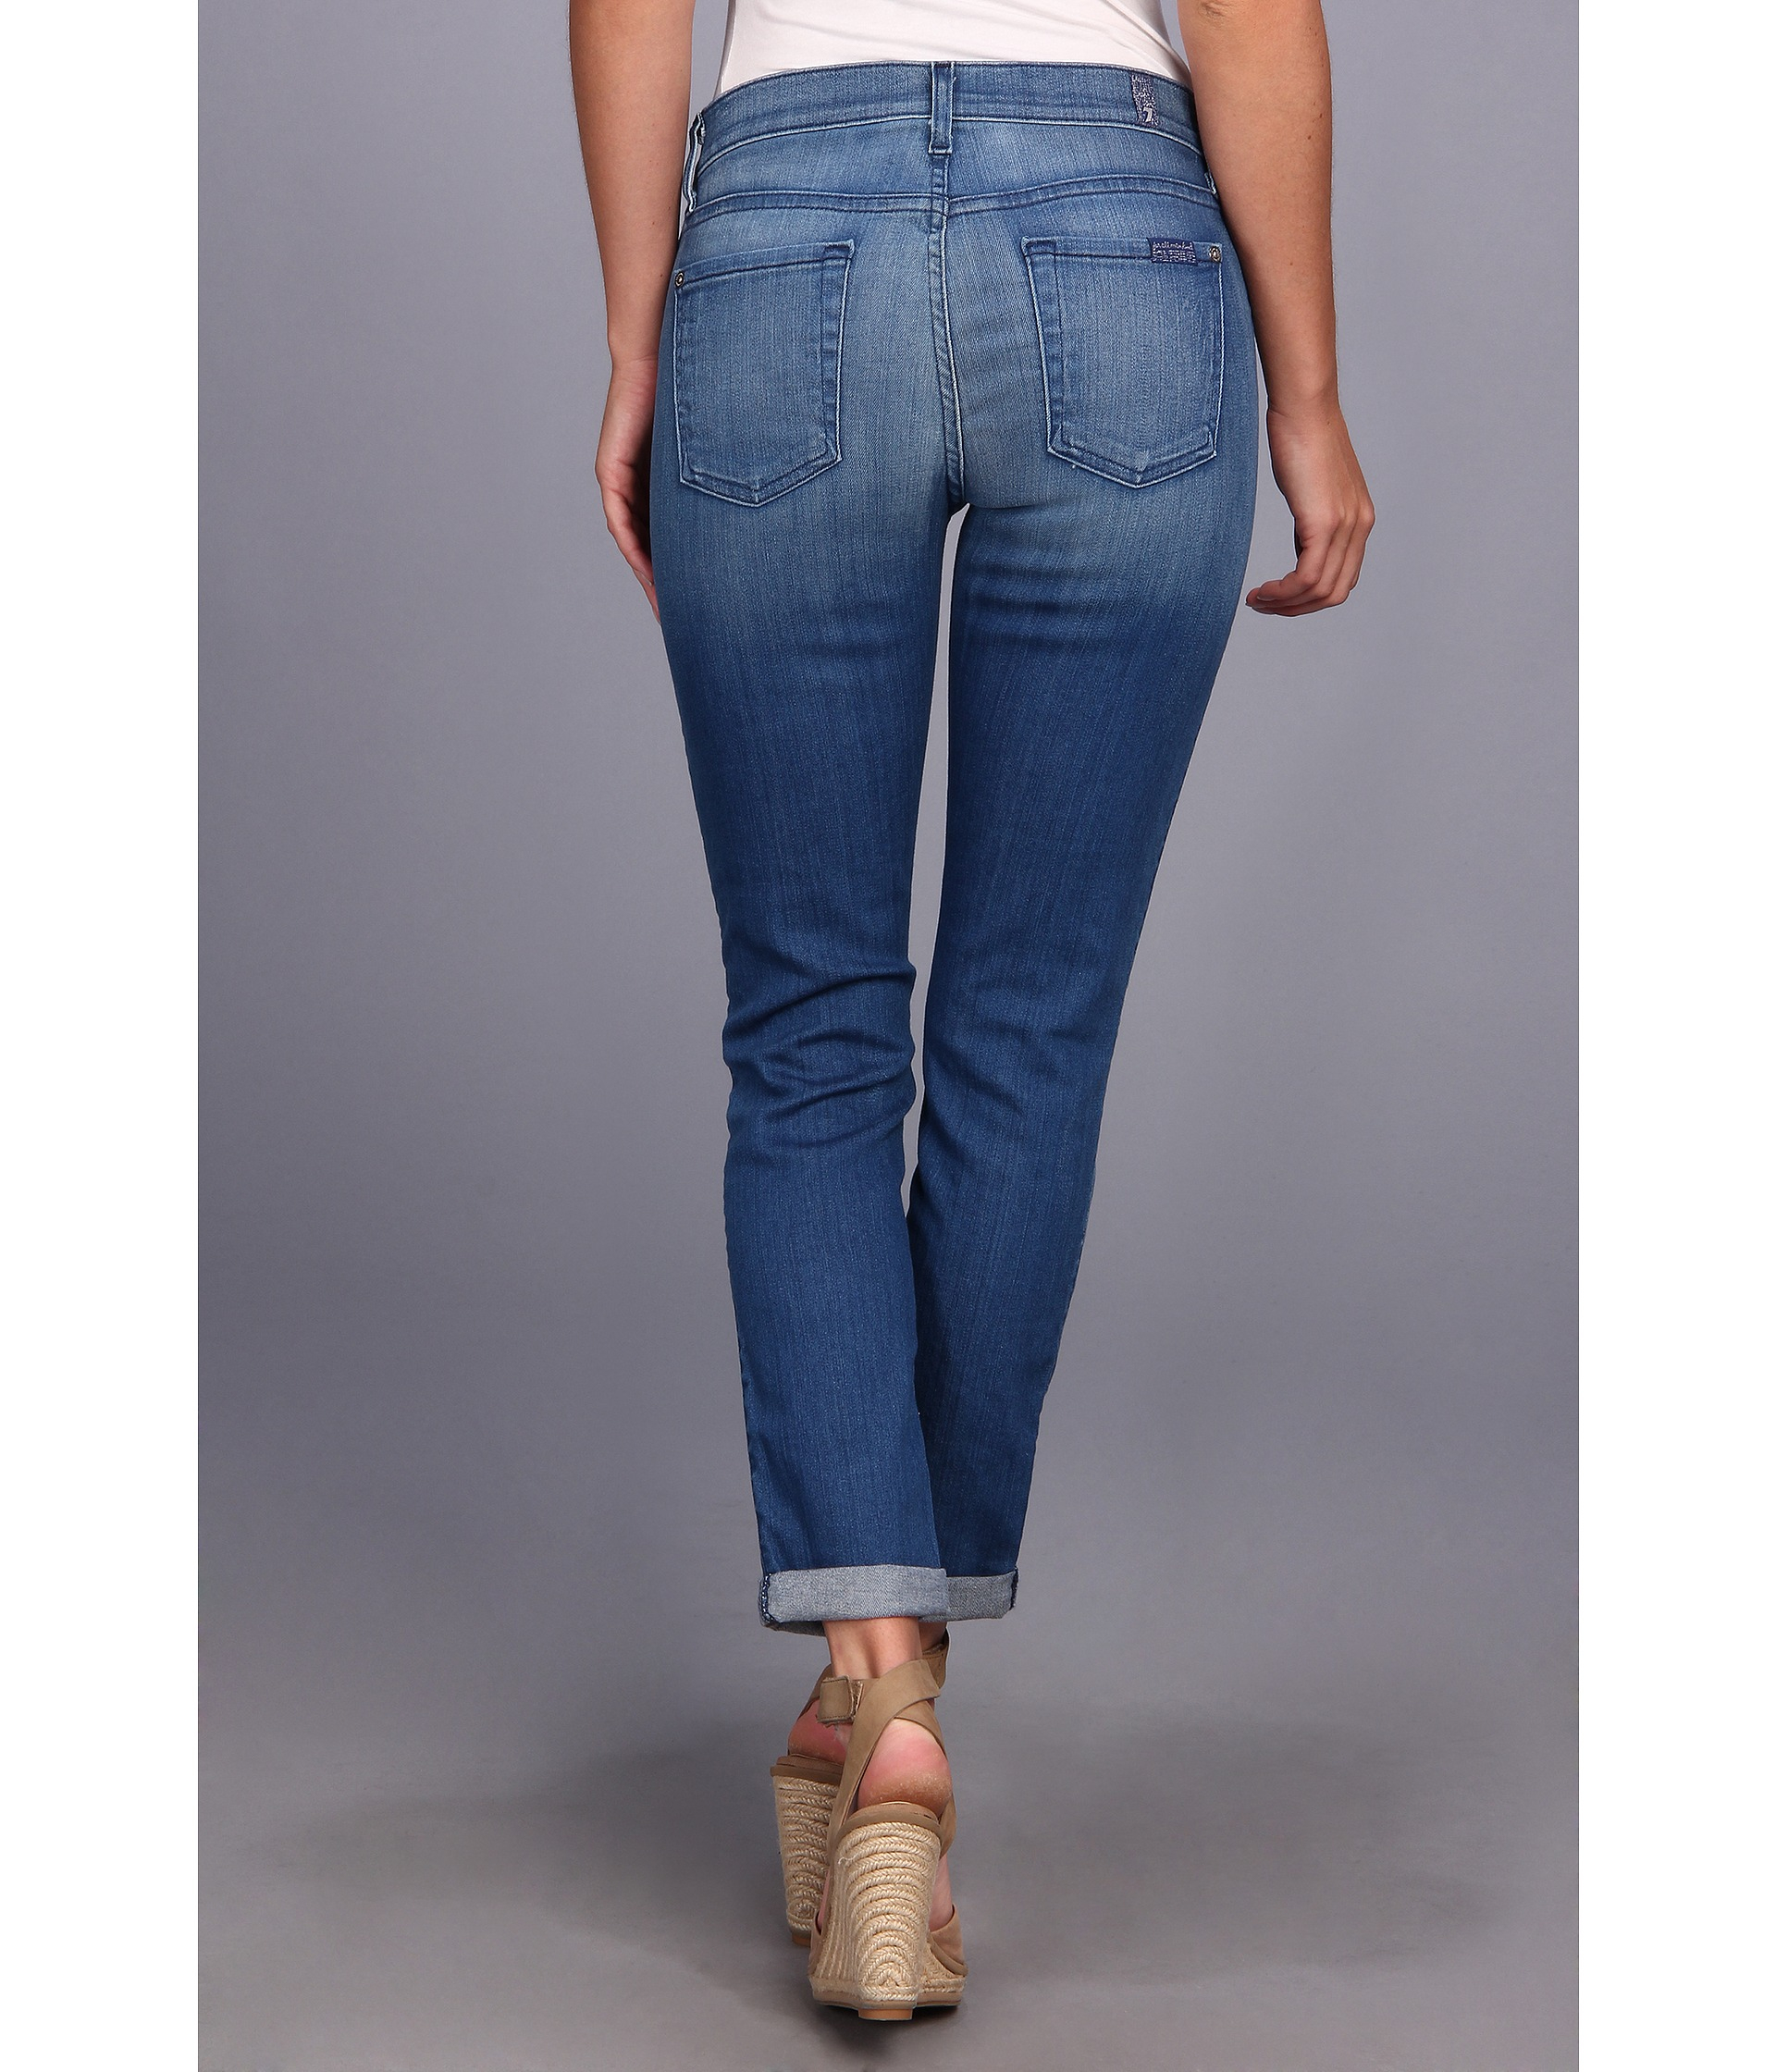 7 for all mankind skinny crop and roll